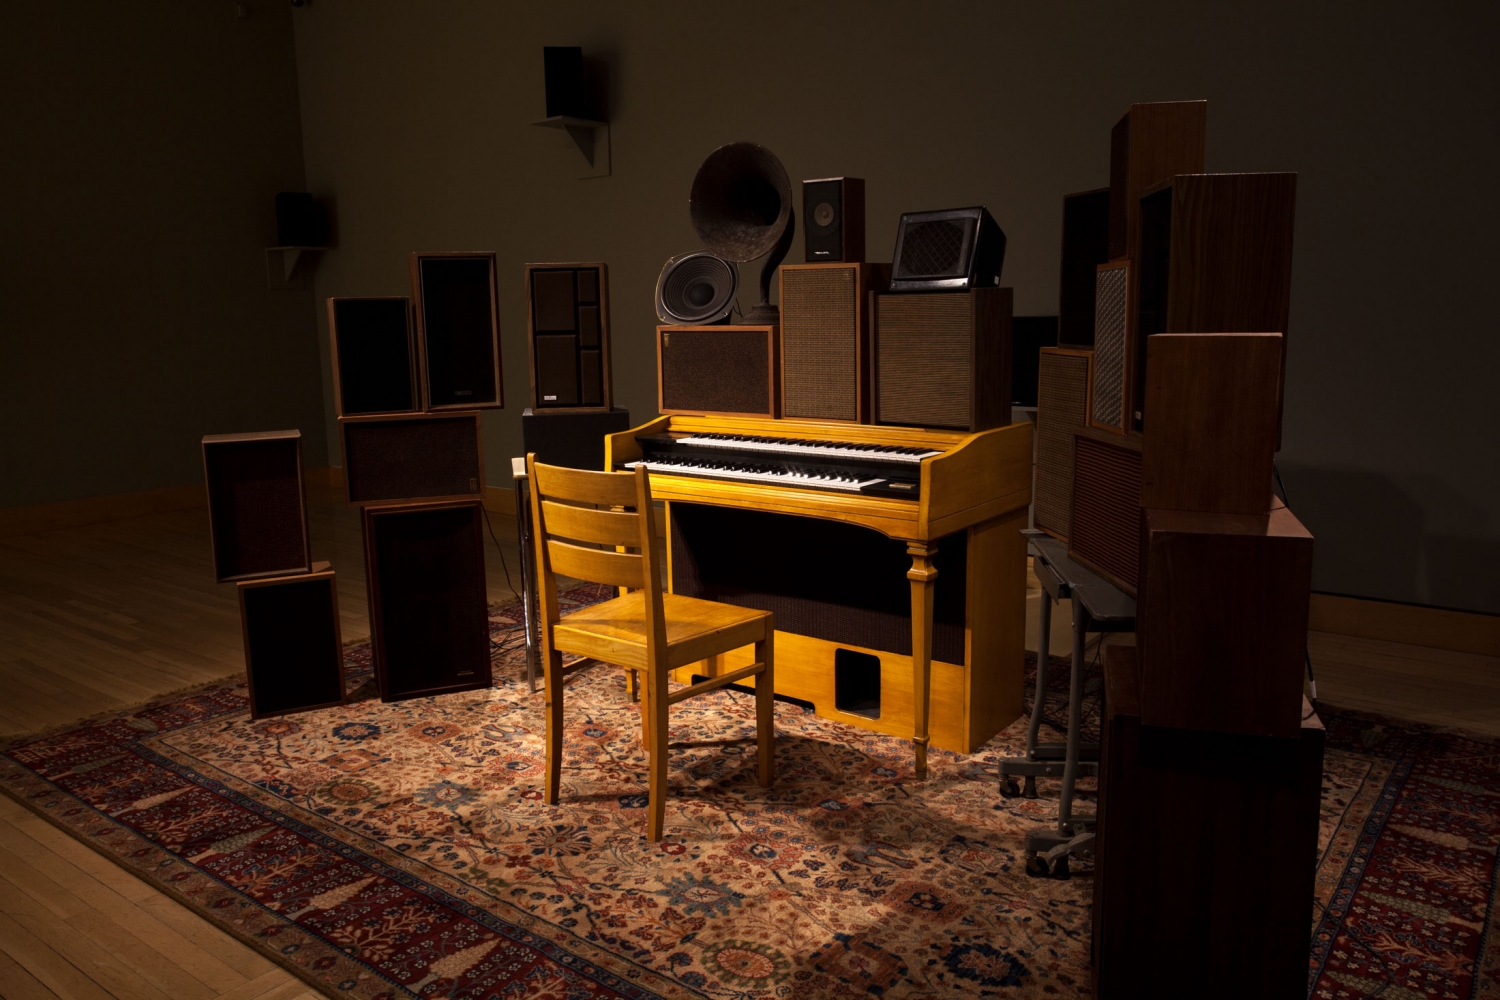 Janet Cardiff and George Bures Miller
The Poetry Machine,&amp;nbsp;2017
Interactive audio/mixed-media installation including organ, speakers, carpet, computer and electronics
Dimensions variable
Installation view,&amp;nbsp;THE POETRY MACHINE &amp;amp; Other Works
May 3 &amp;ndash;&amp;nbsp;July 5, 2018
Fraenkel Gallery, San Francisco